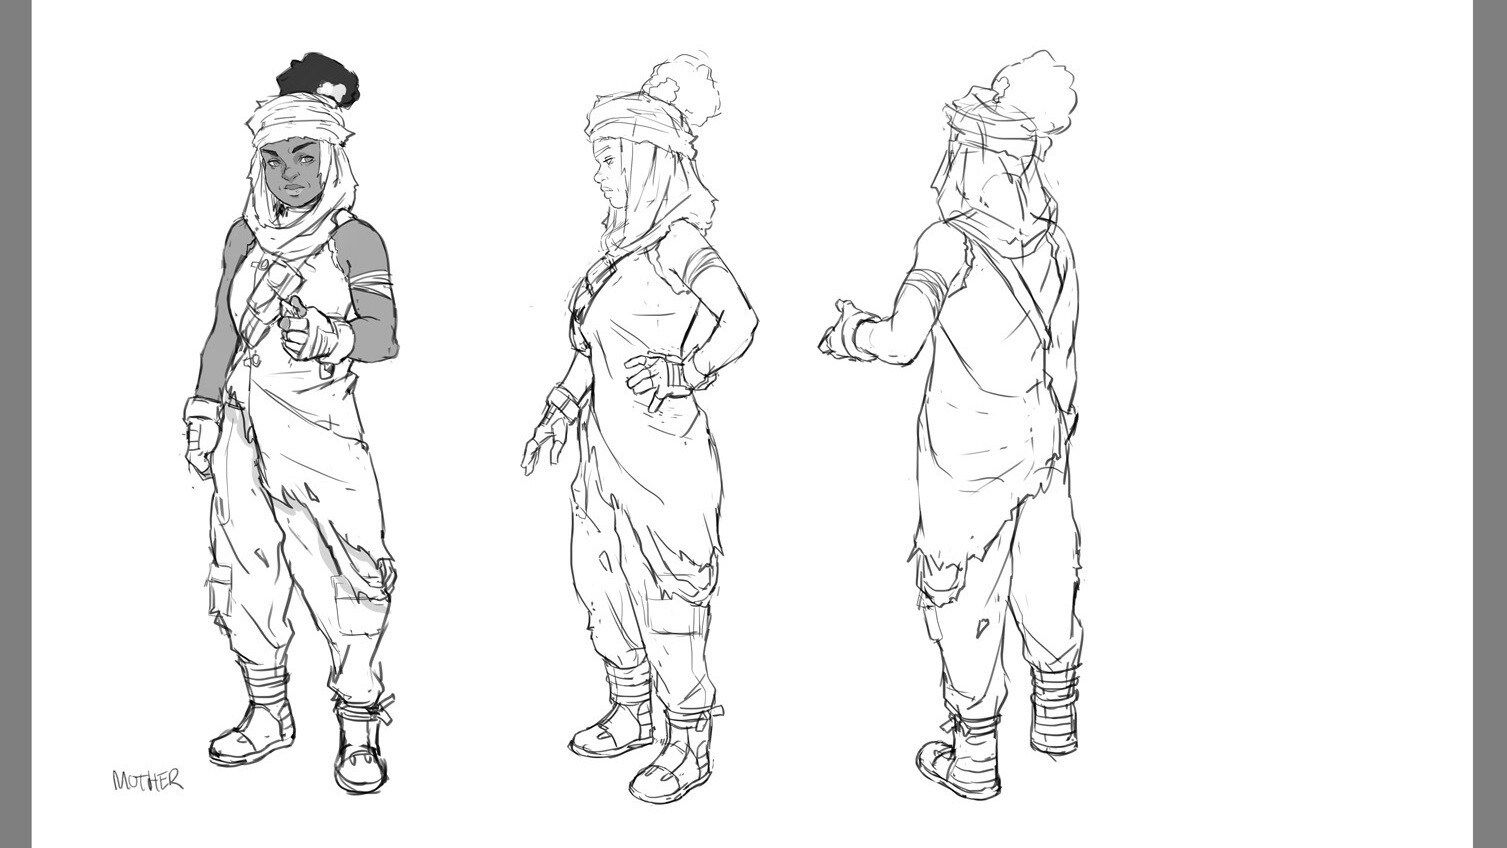 Livy's mother concept art by Rejean Dubois and Arthell Isom